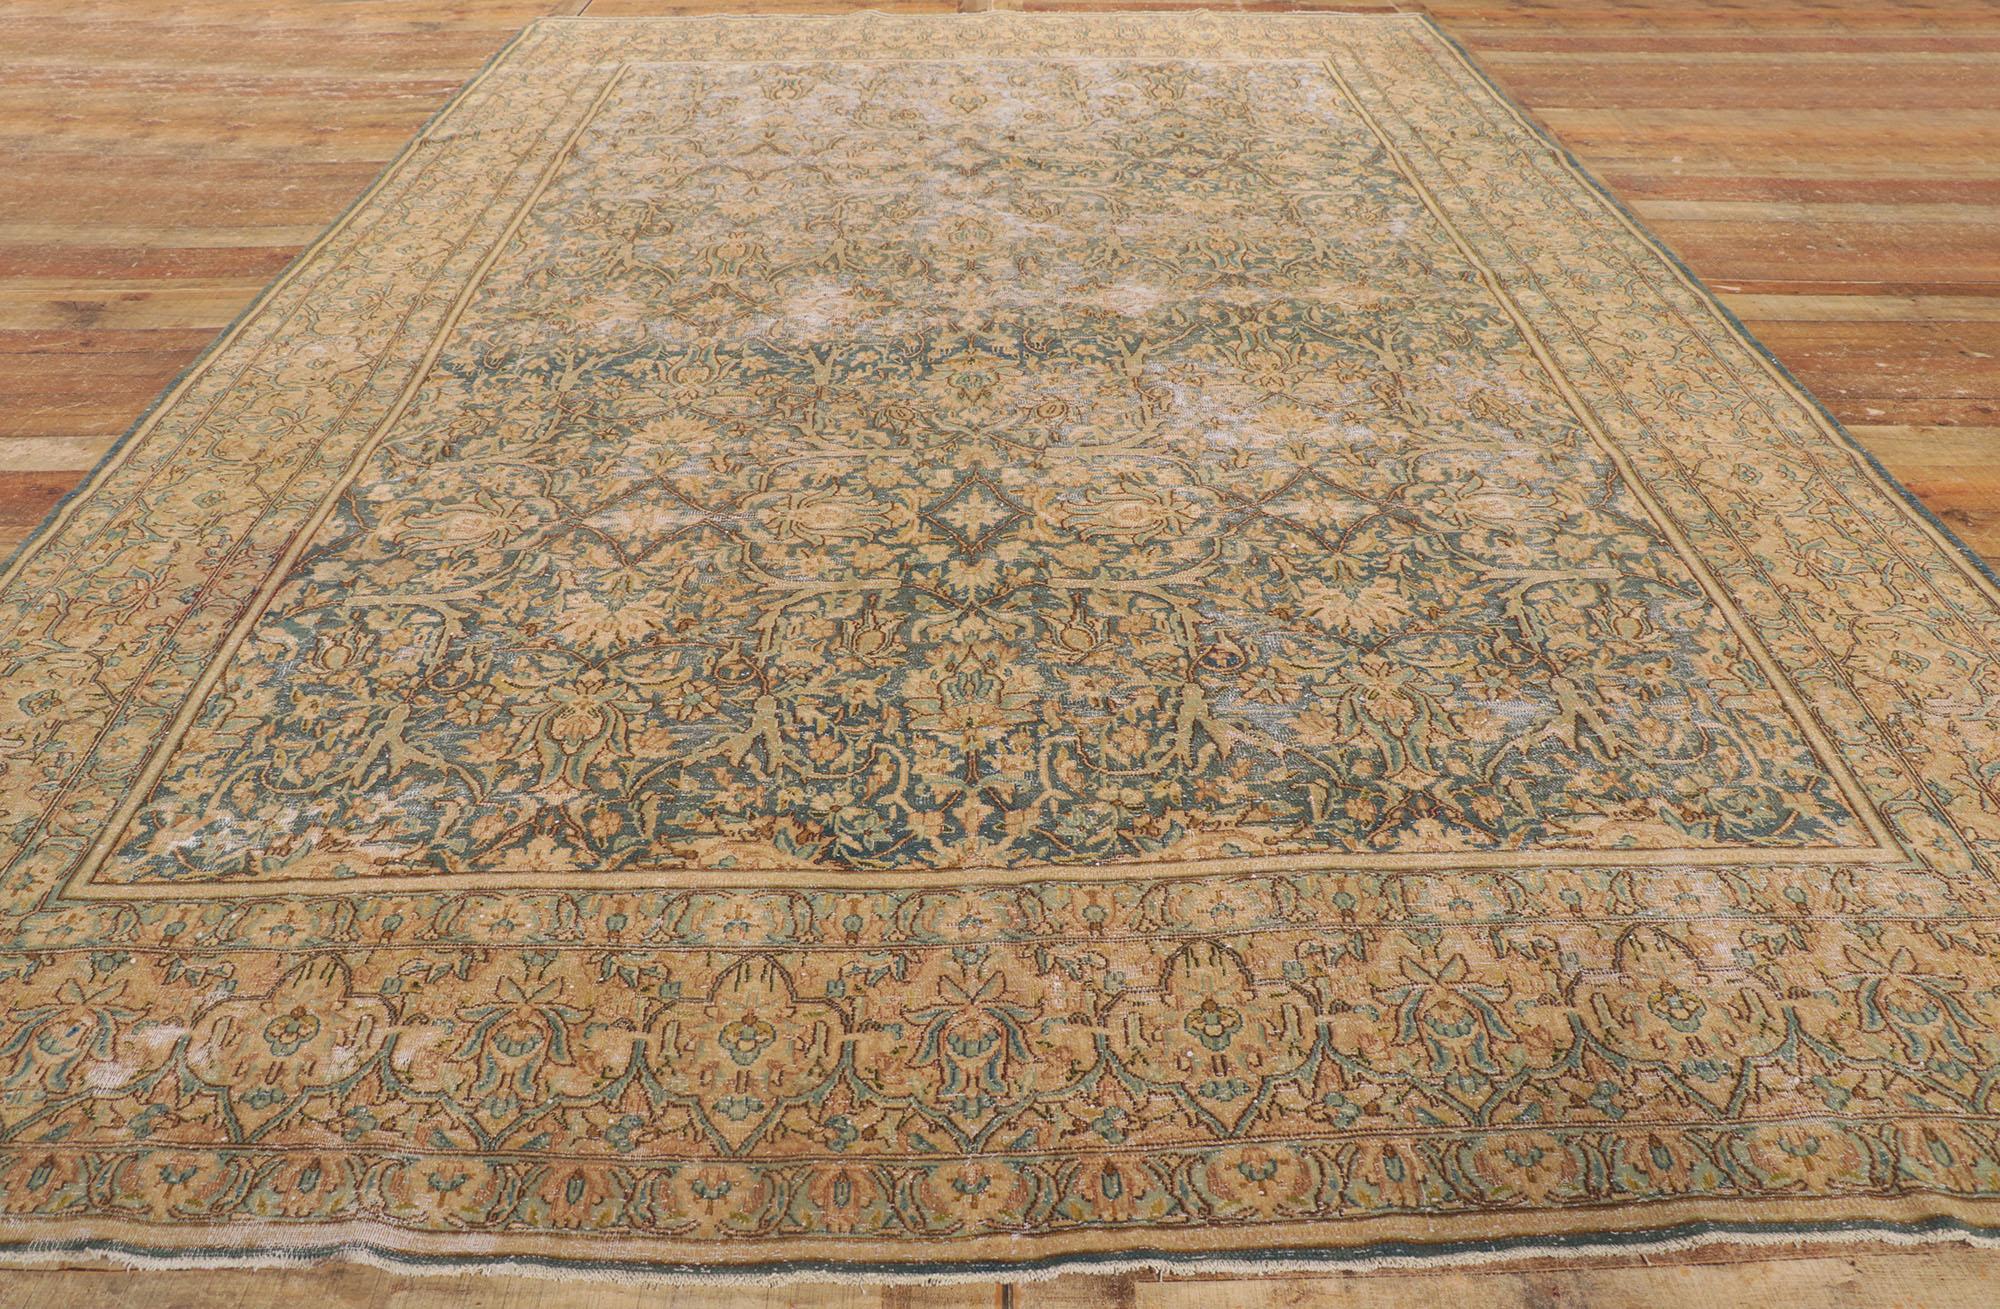 Wool Antique-Worn Persian Kerman Rug, Rugged Beauty Meets Laid-Back Luxury For Sale